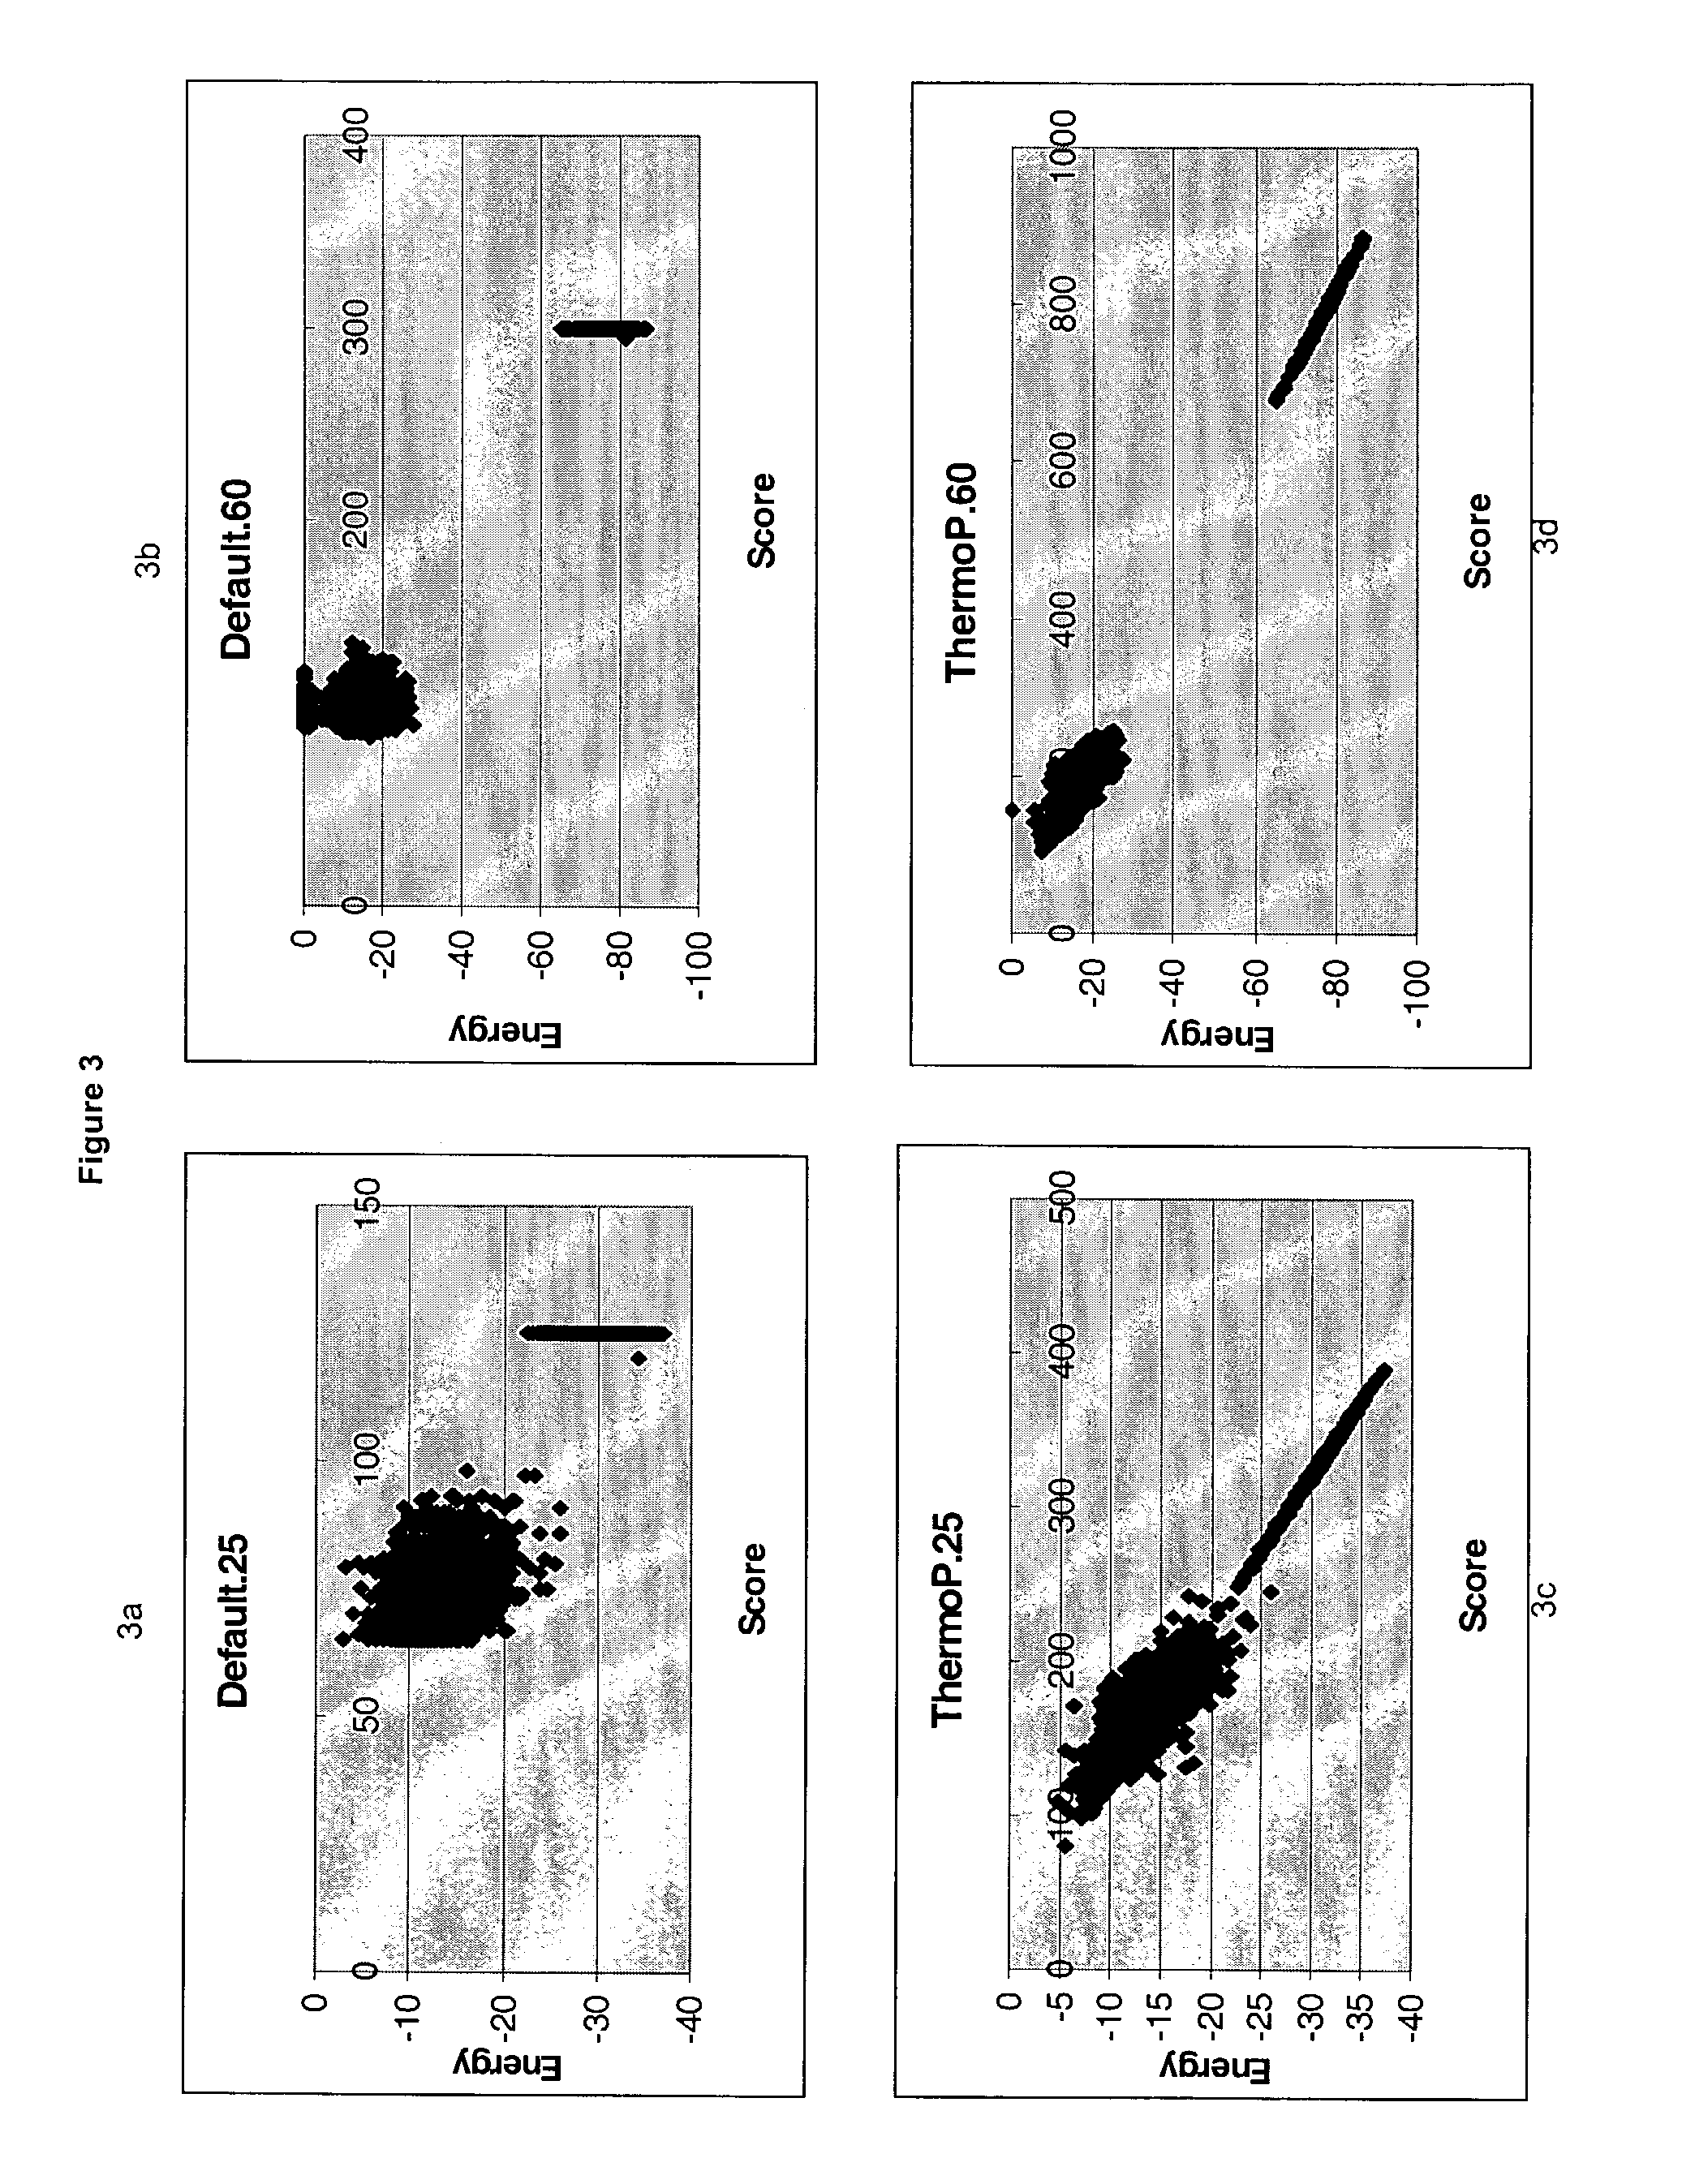 Methods for searching polynucleotide probe targets in databases